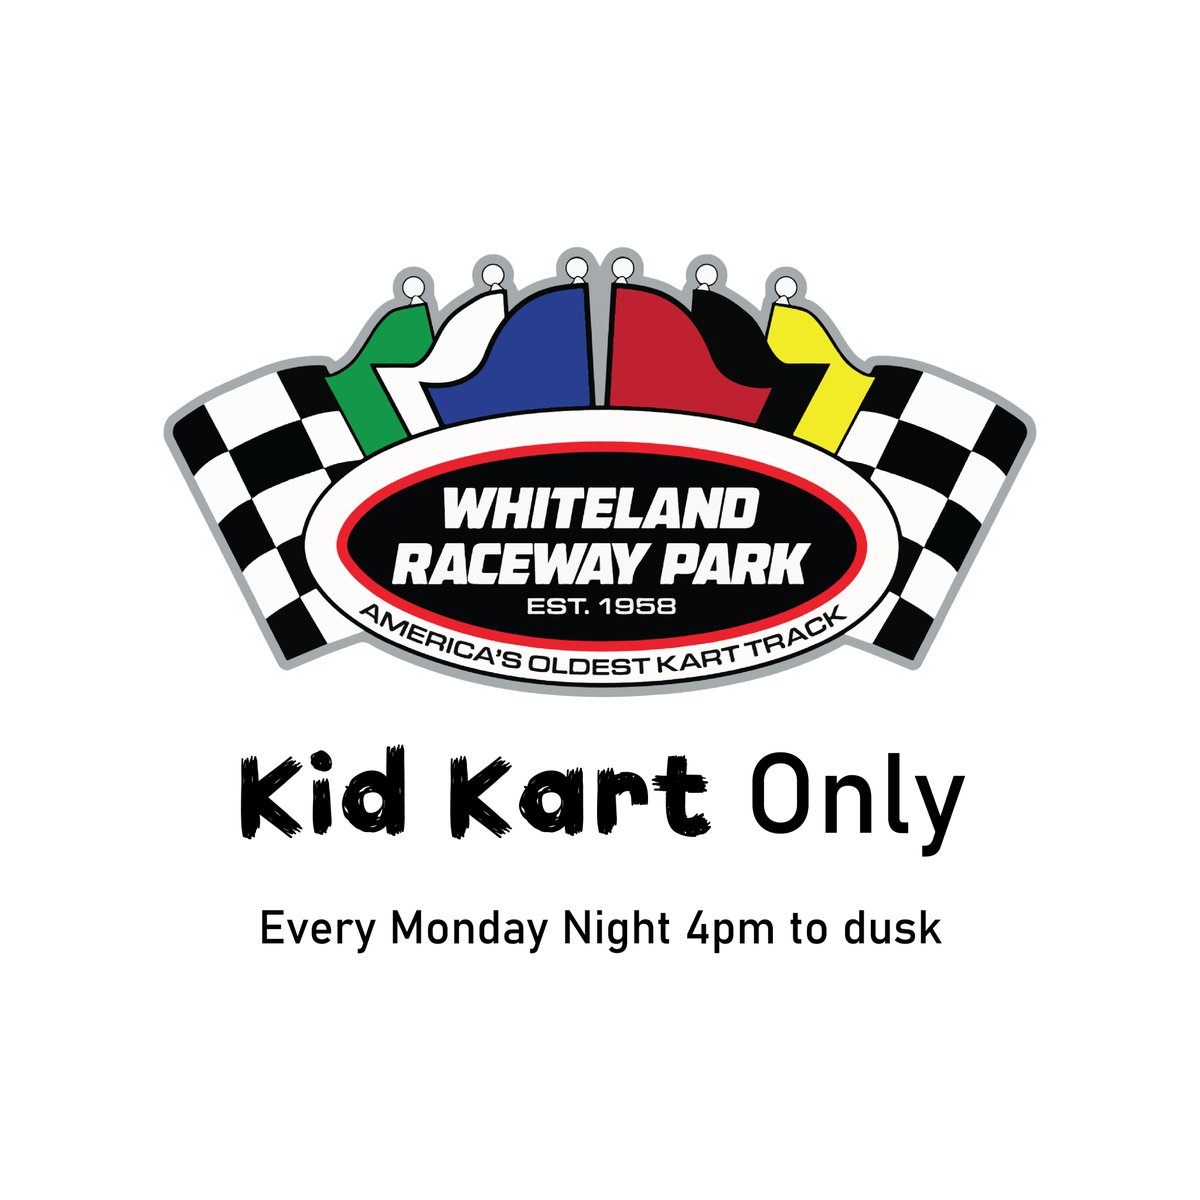 From 4pm to close is kid kart only! Thanks for your cooperation in helping out the next generation of drivers!